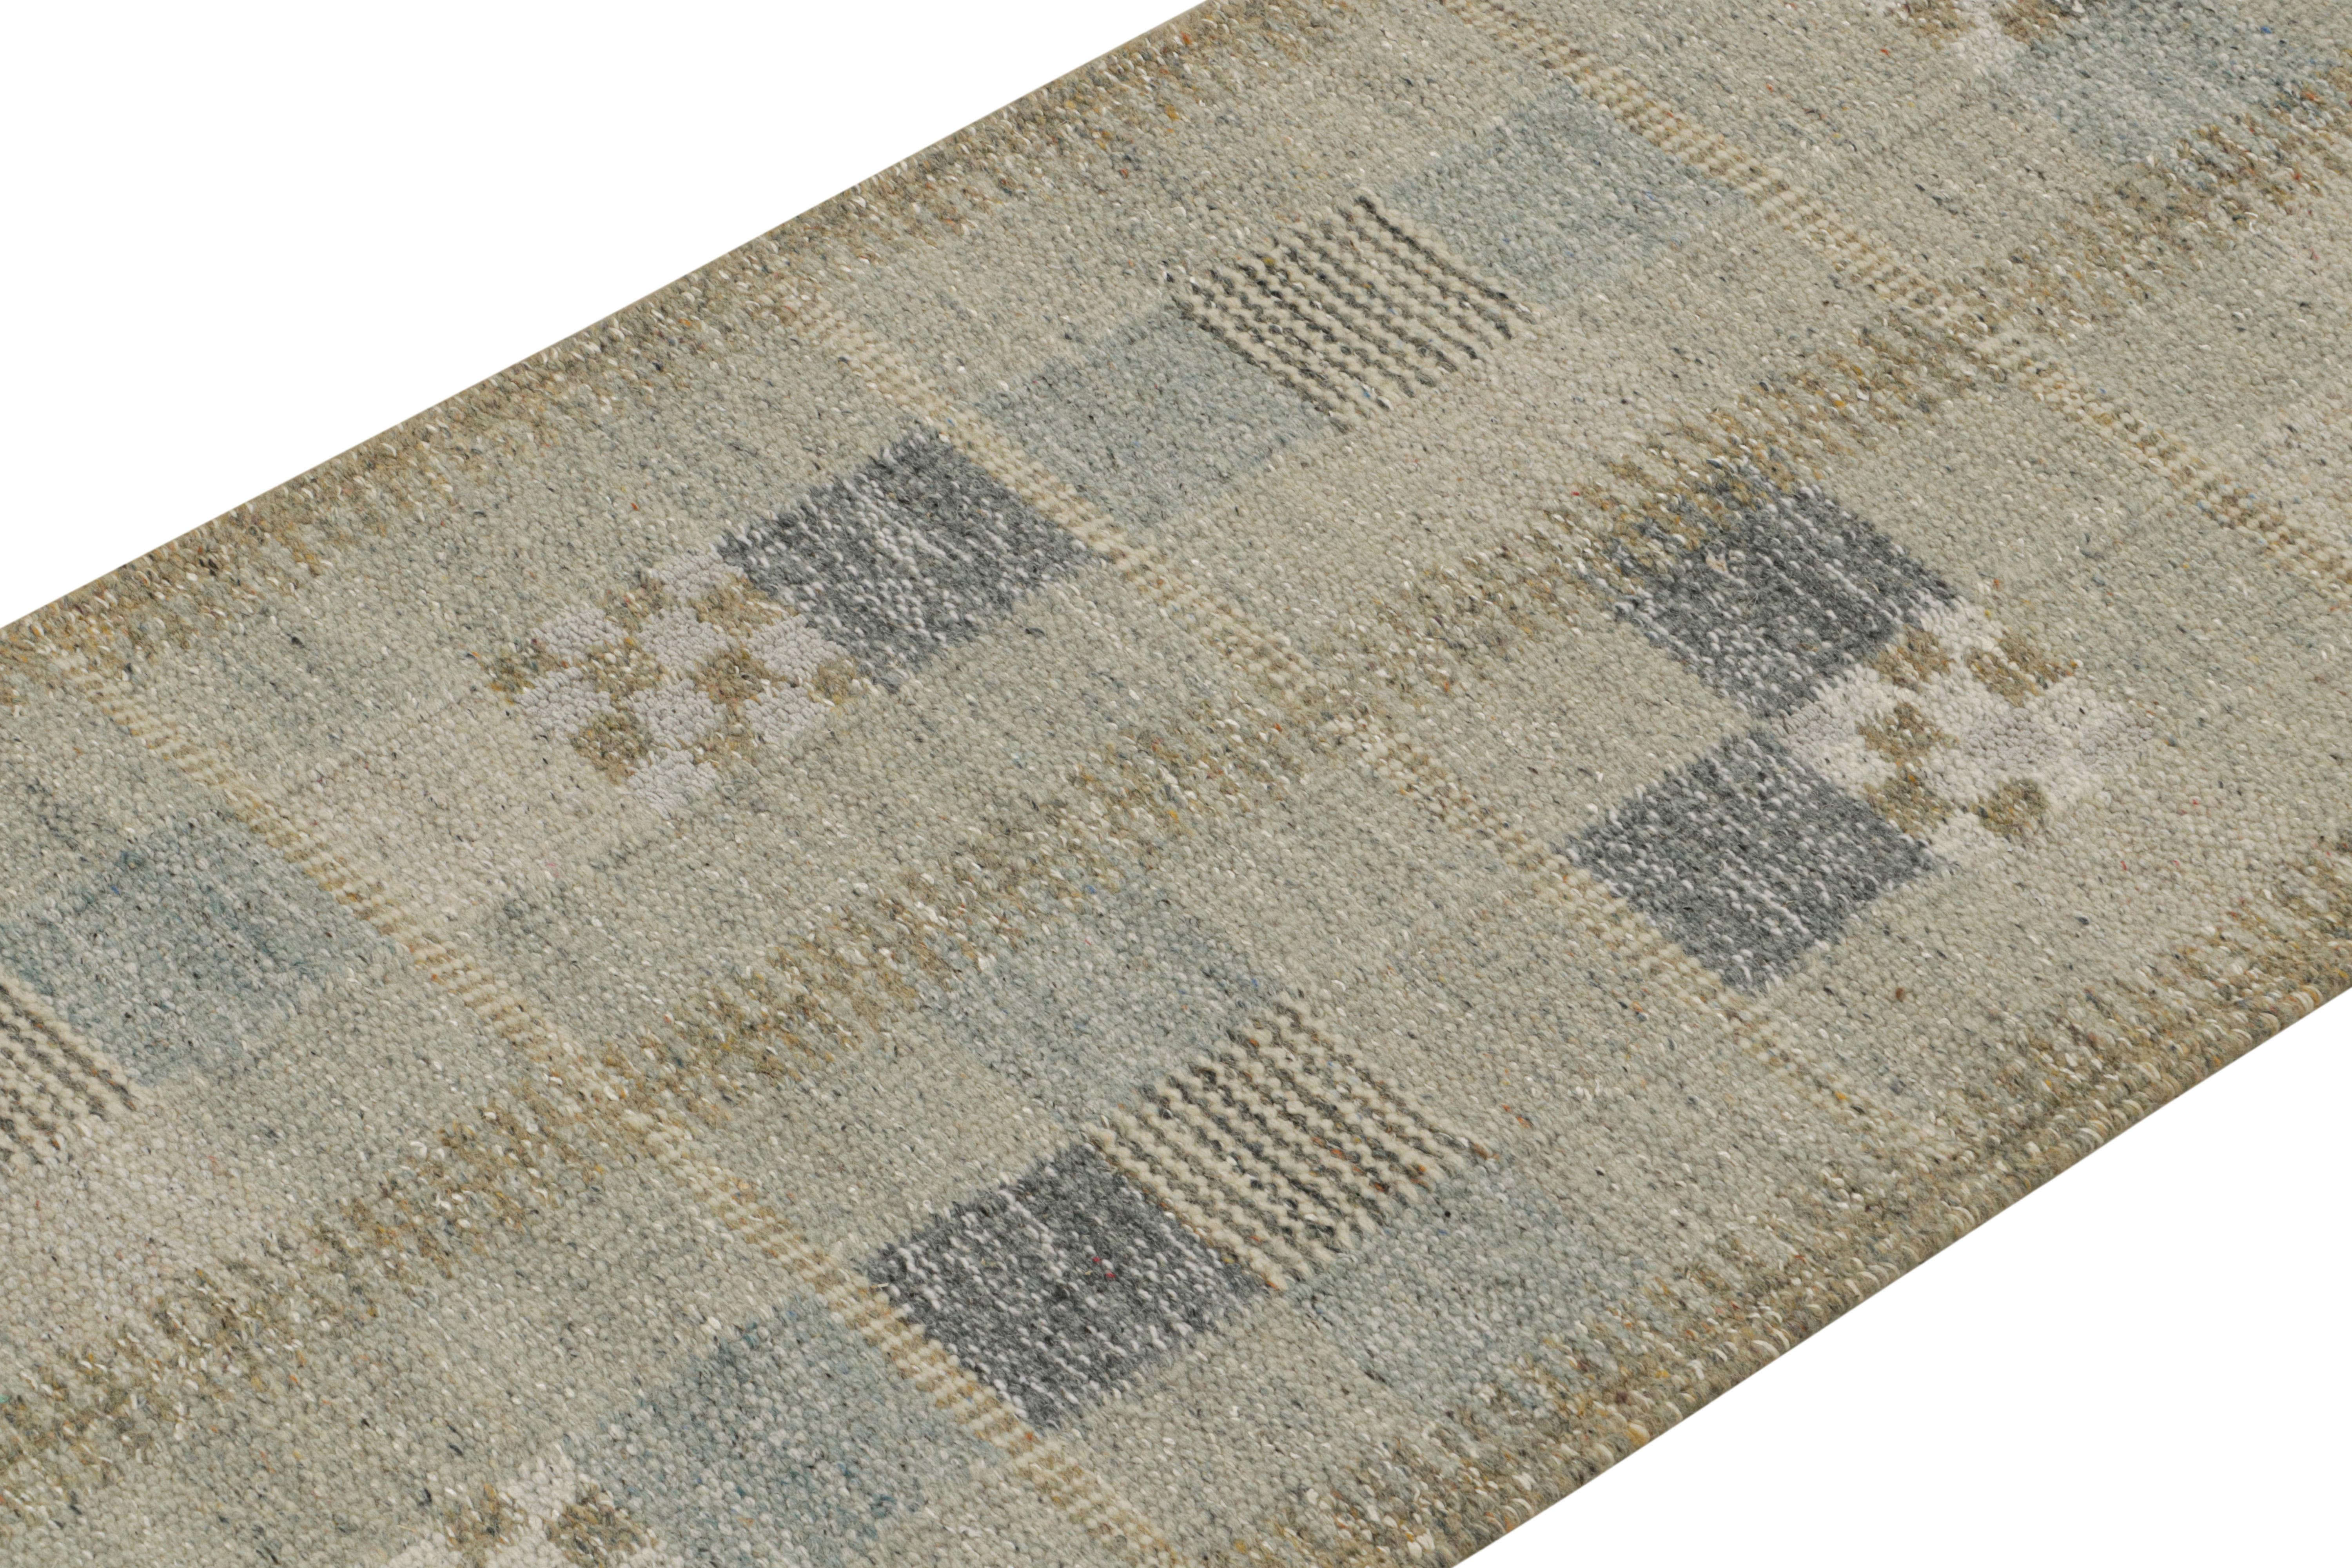 Indian Rug & Kilim’s Scandinavian Style Kilim in Blue & gray Geometric Patterns For Sale